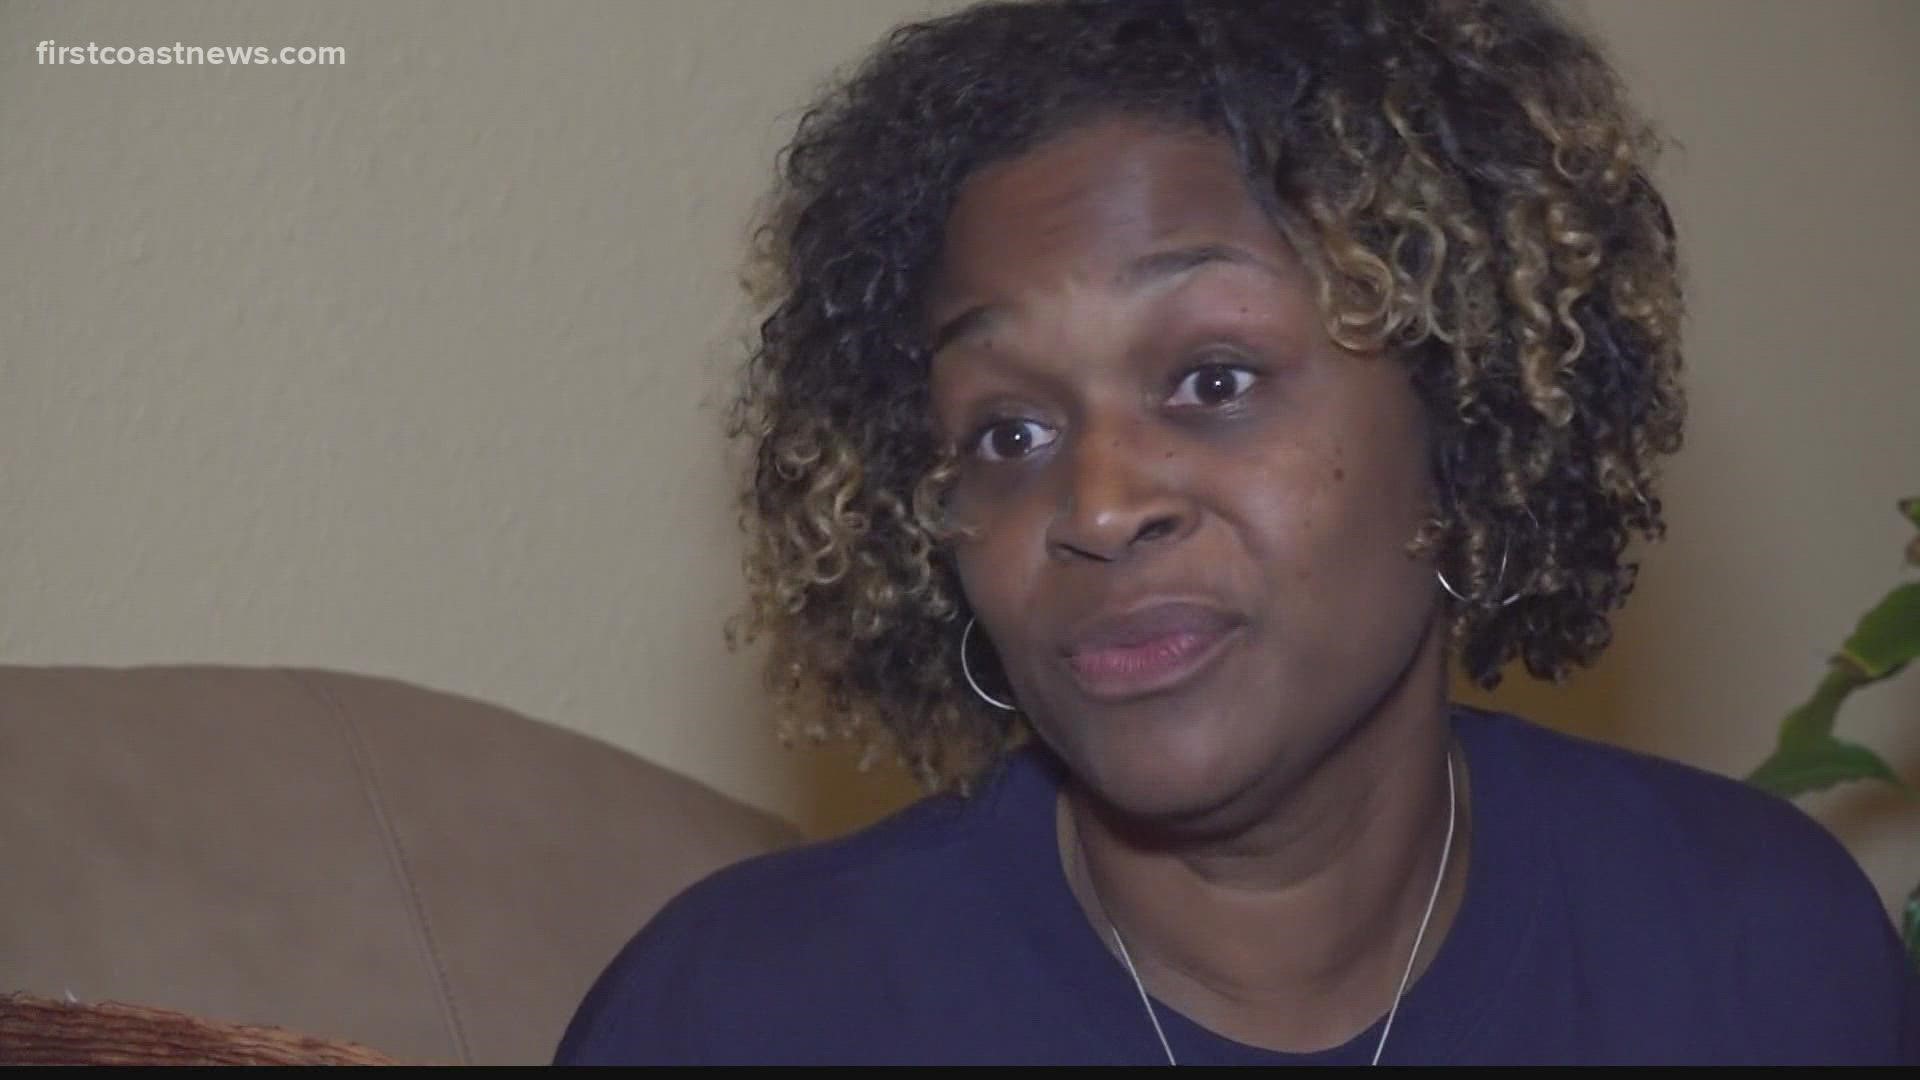 Mother of Michael Freeland sits down with First Coast News following her son's death